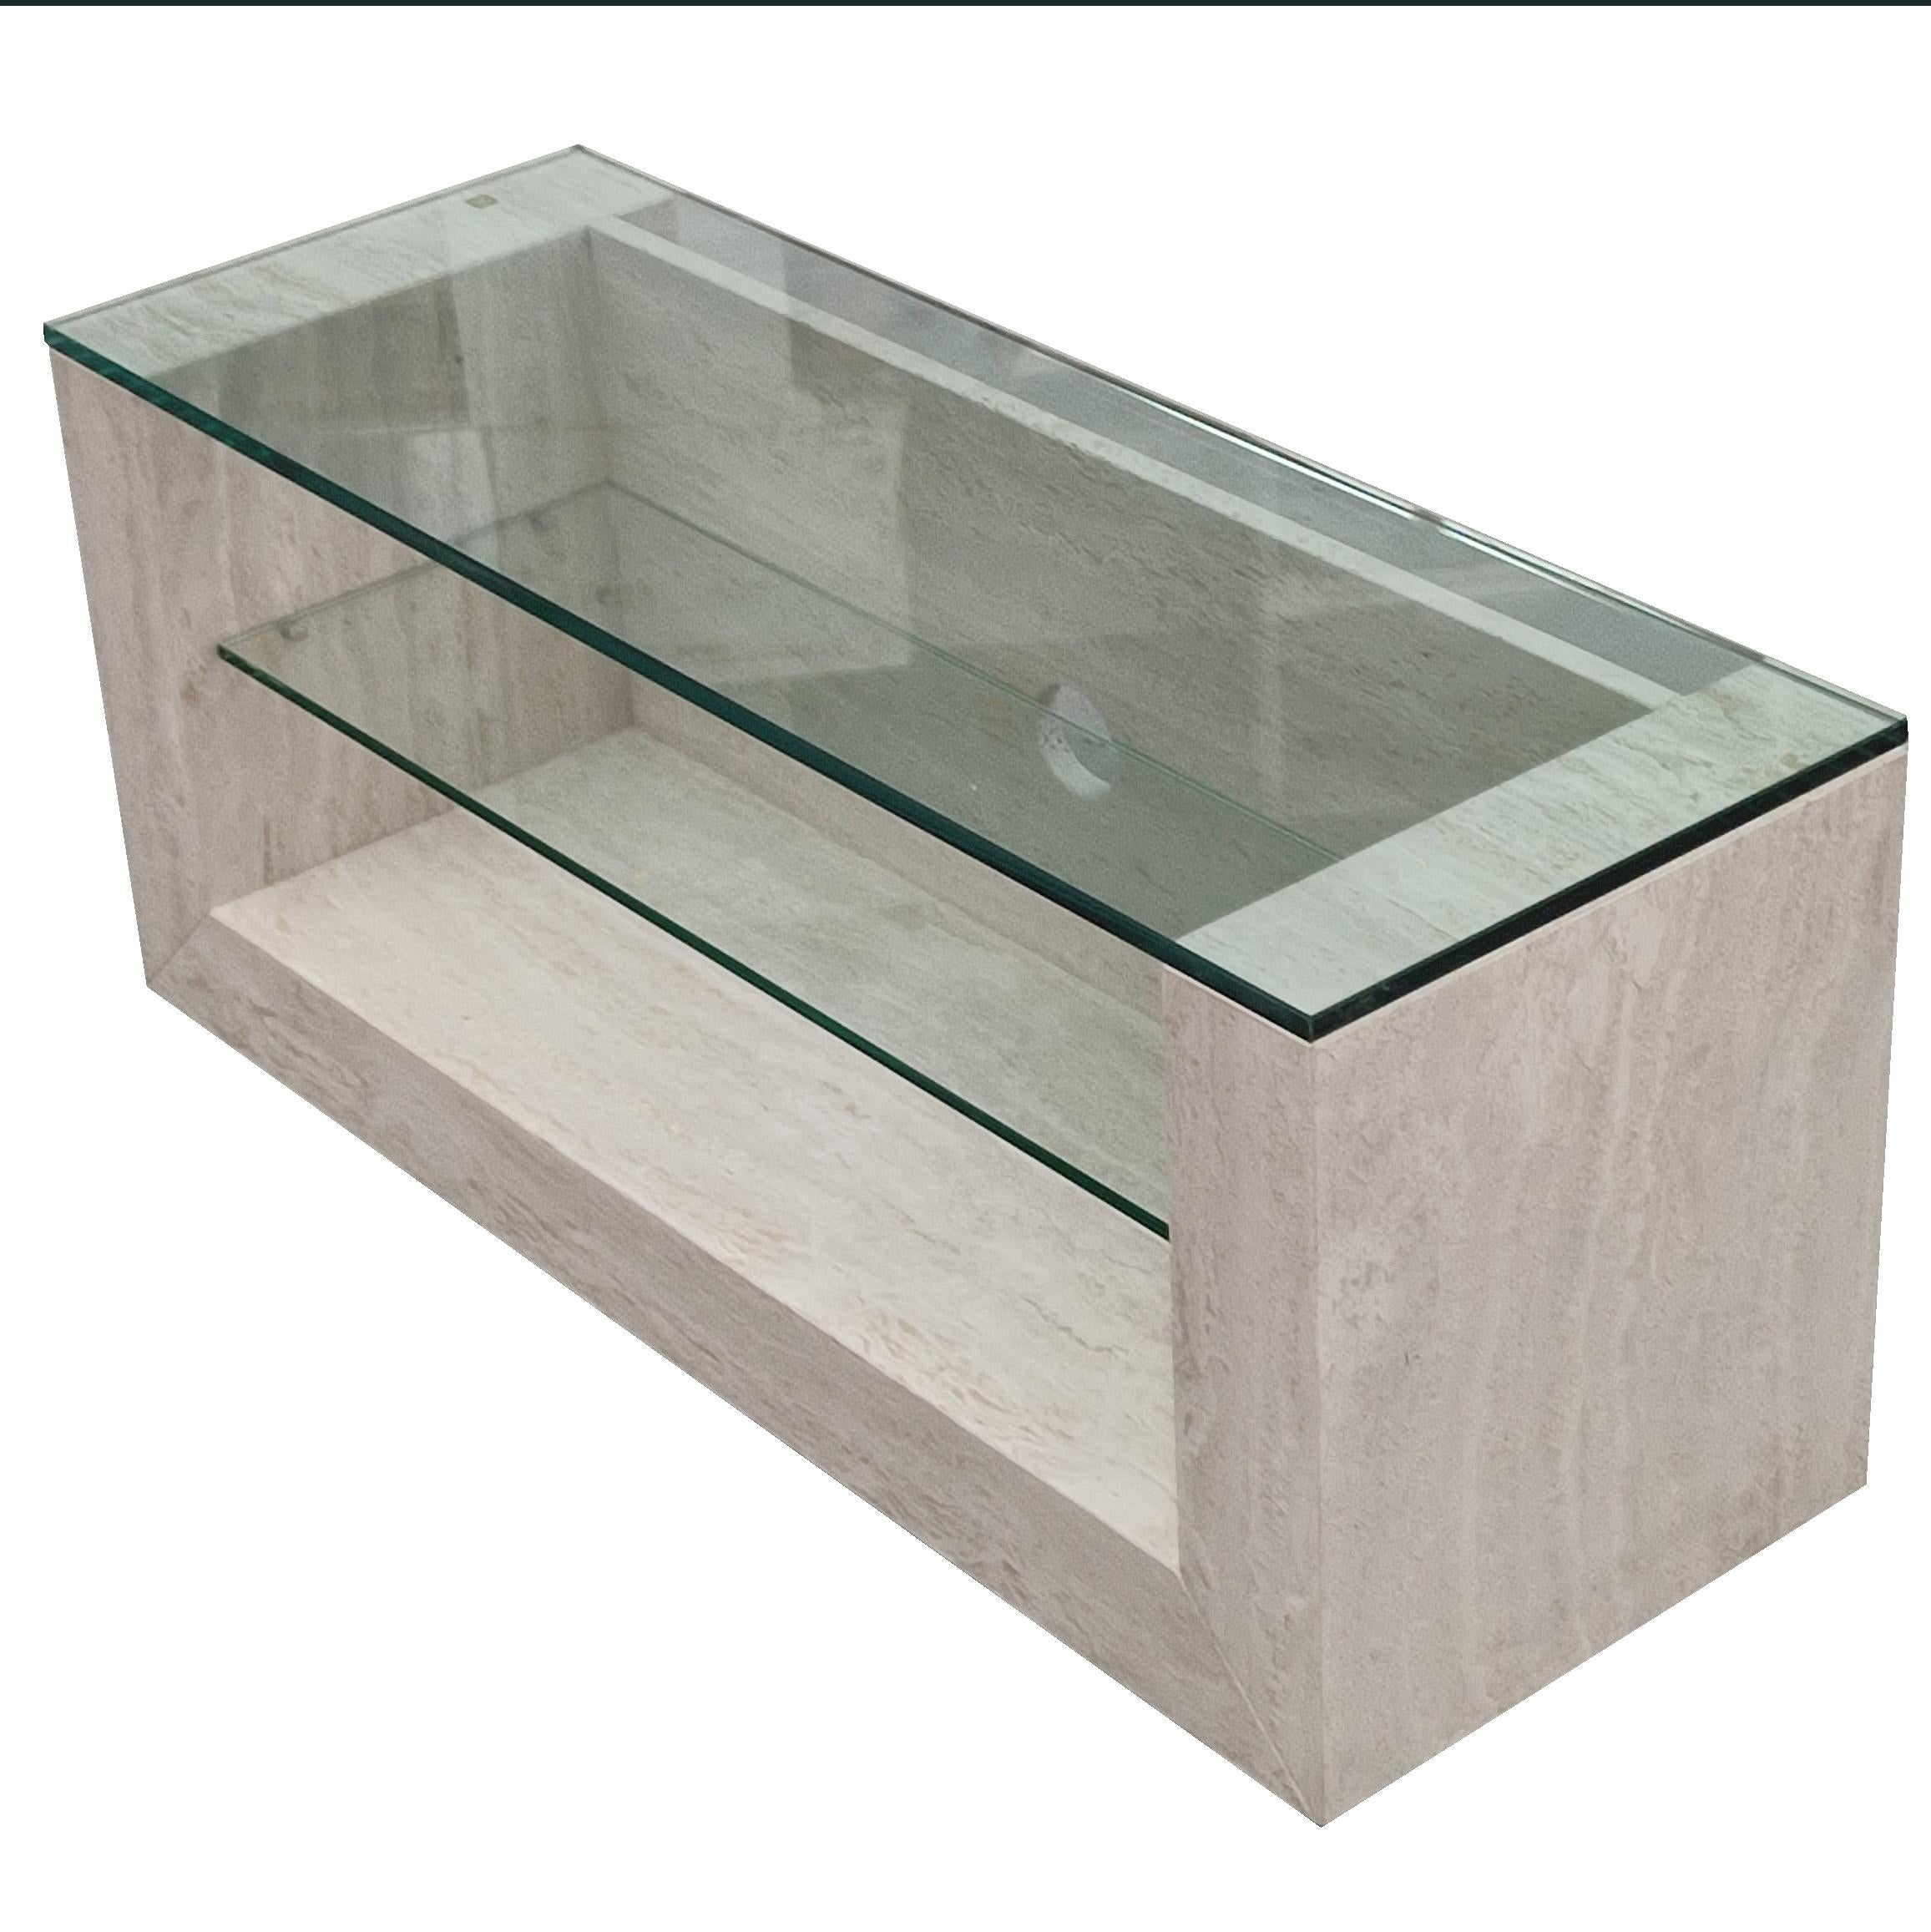 TV TABLE Travertine Marble & Crystals Wheels Contemporary Made in Spain In Stock
Travertine marble television table with a matte finish and two glass panels to support different video or audio electronic devices. The table has casters for more